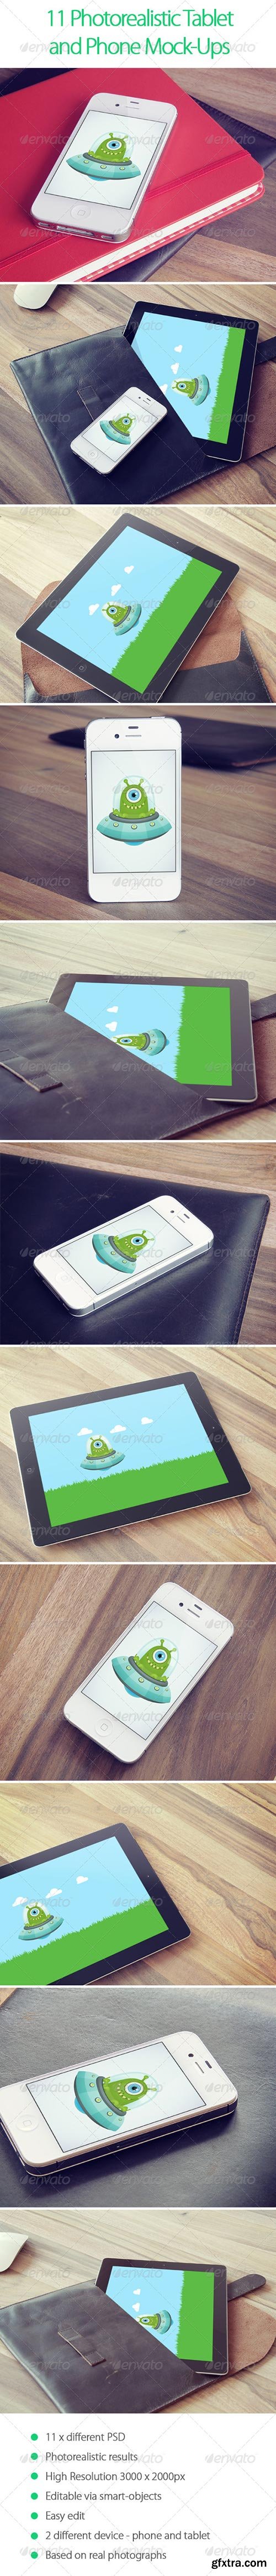 GraphicRiver - 11 Photorealistic Tablet and Phone Mock-Ups